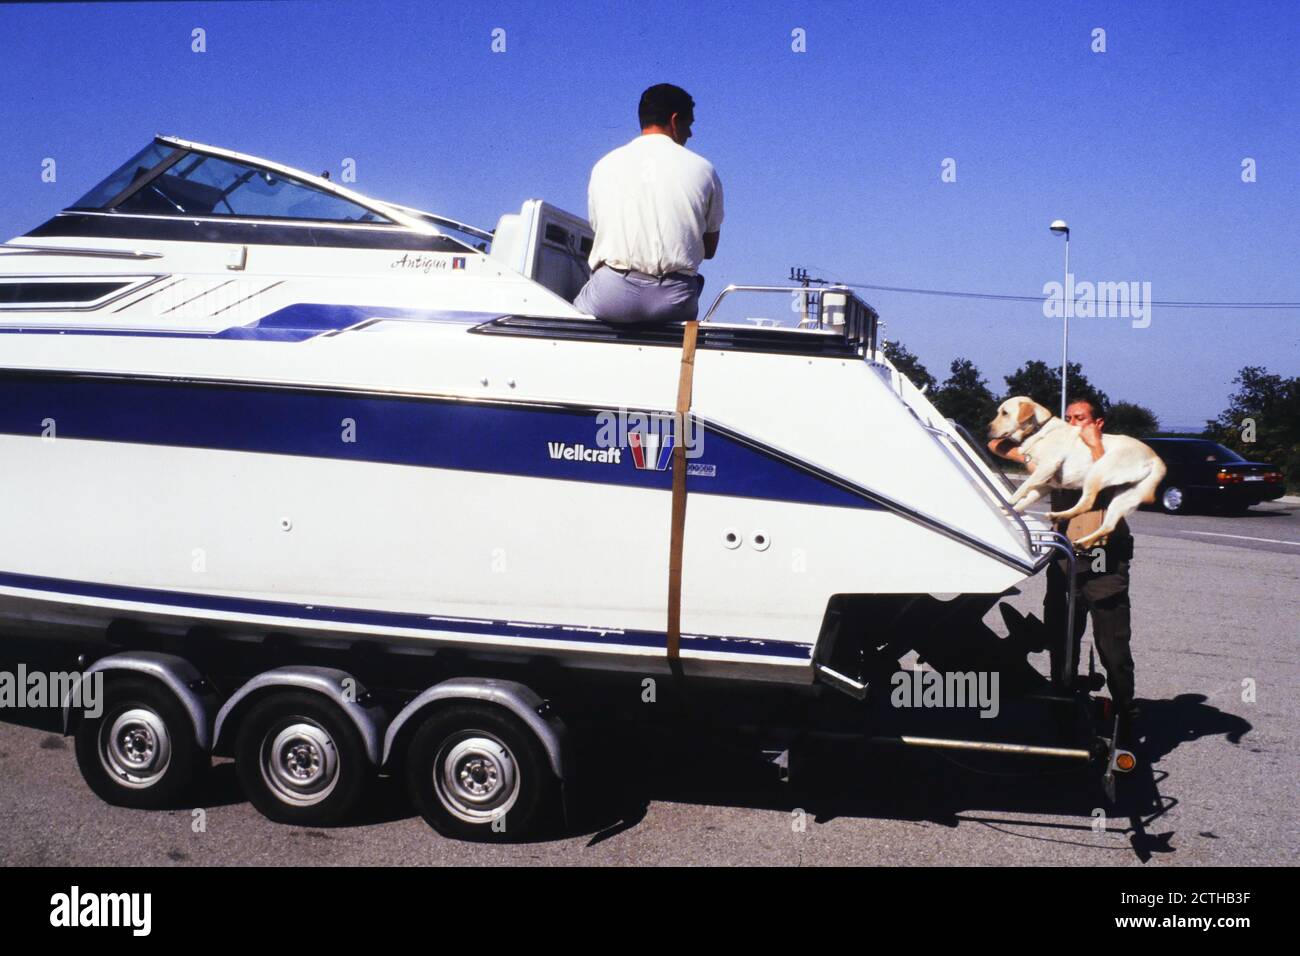 French Customs Officers drug control inspection on A7 motorway, Rhone Valley, France Stock Photo